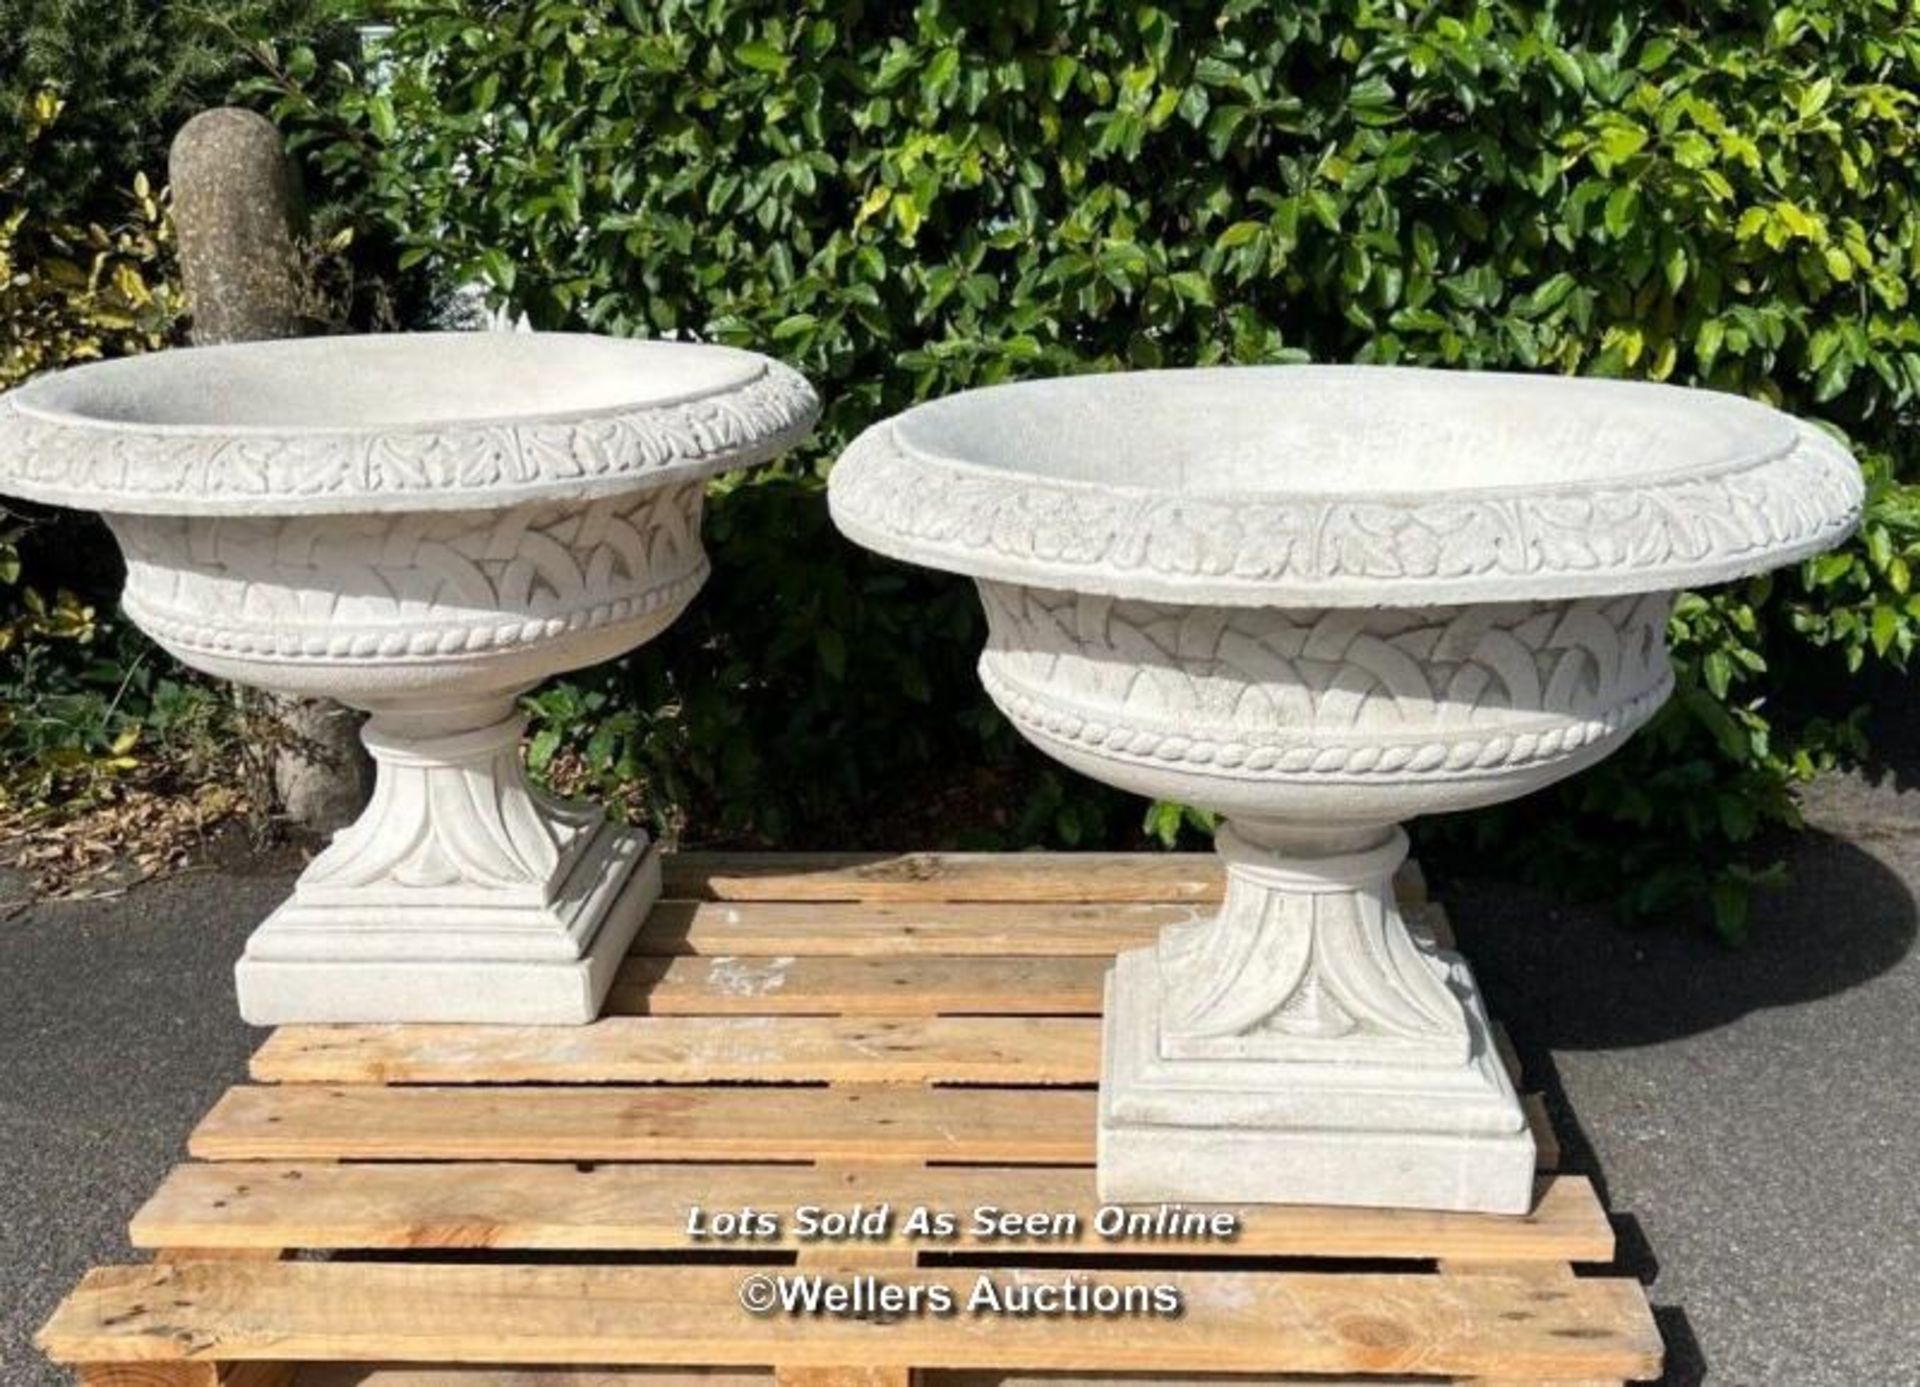 *A LARGE PAIR OF CLASSIC URNS WITH HATCHED SIDE DETAIL AND ACANTHUS DETAILED RIMS, 81CM (H) X - Image 2 of 5